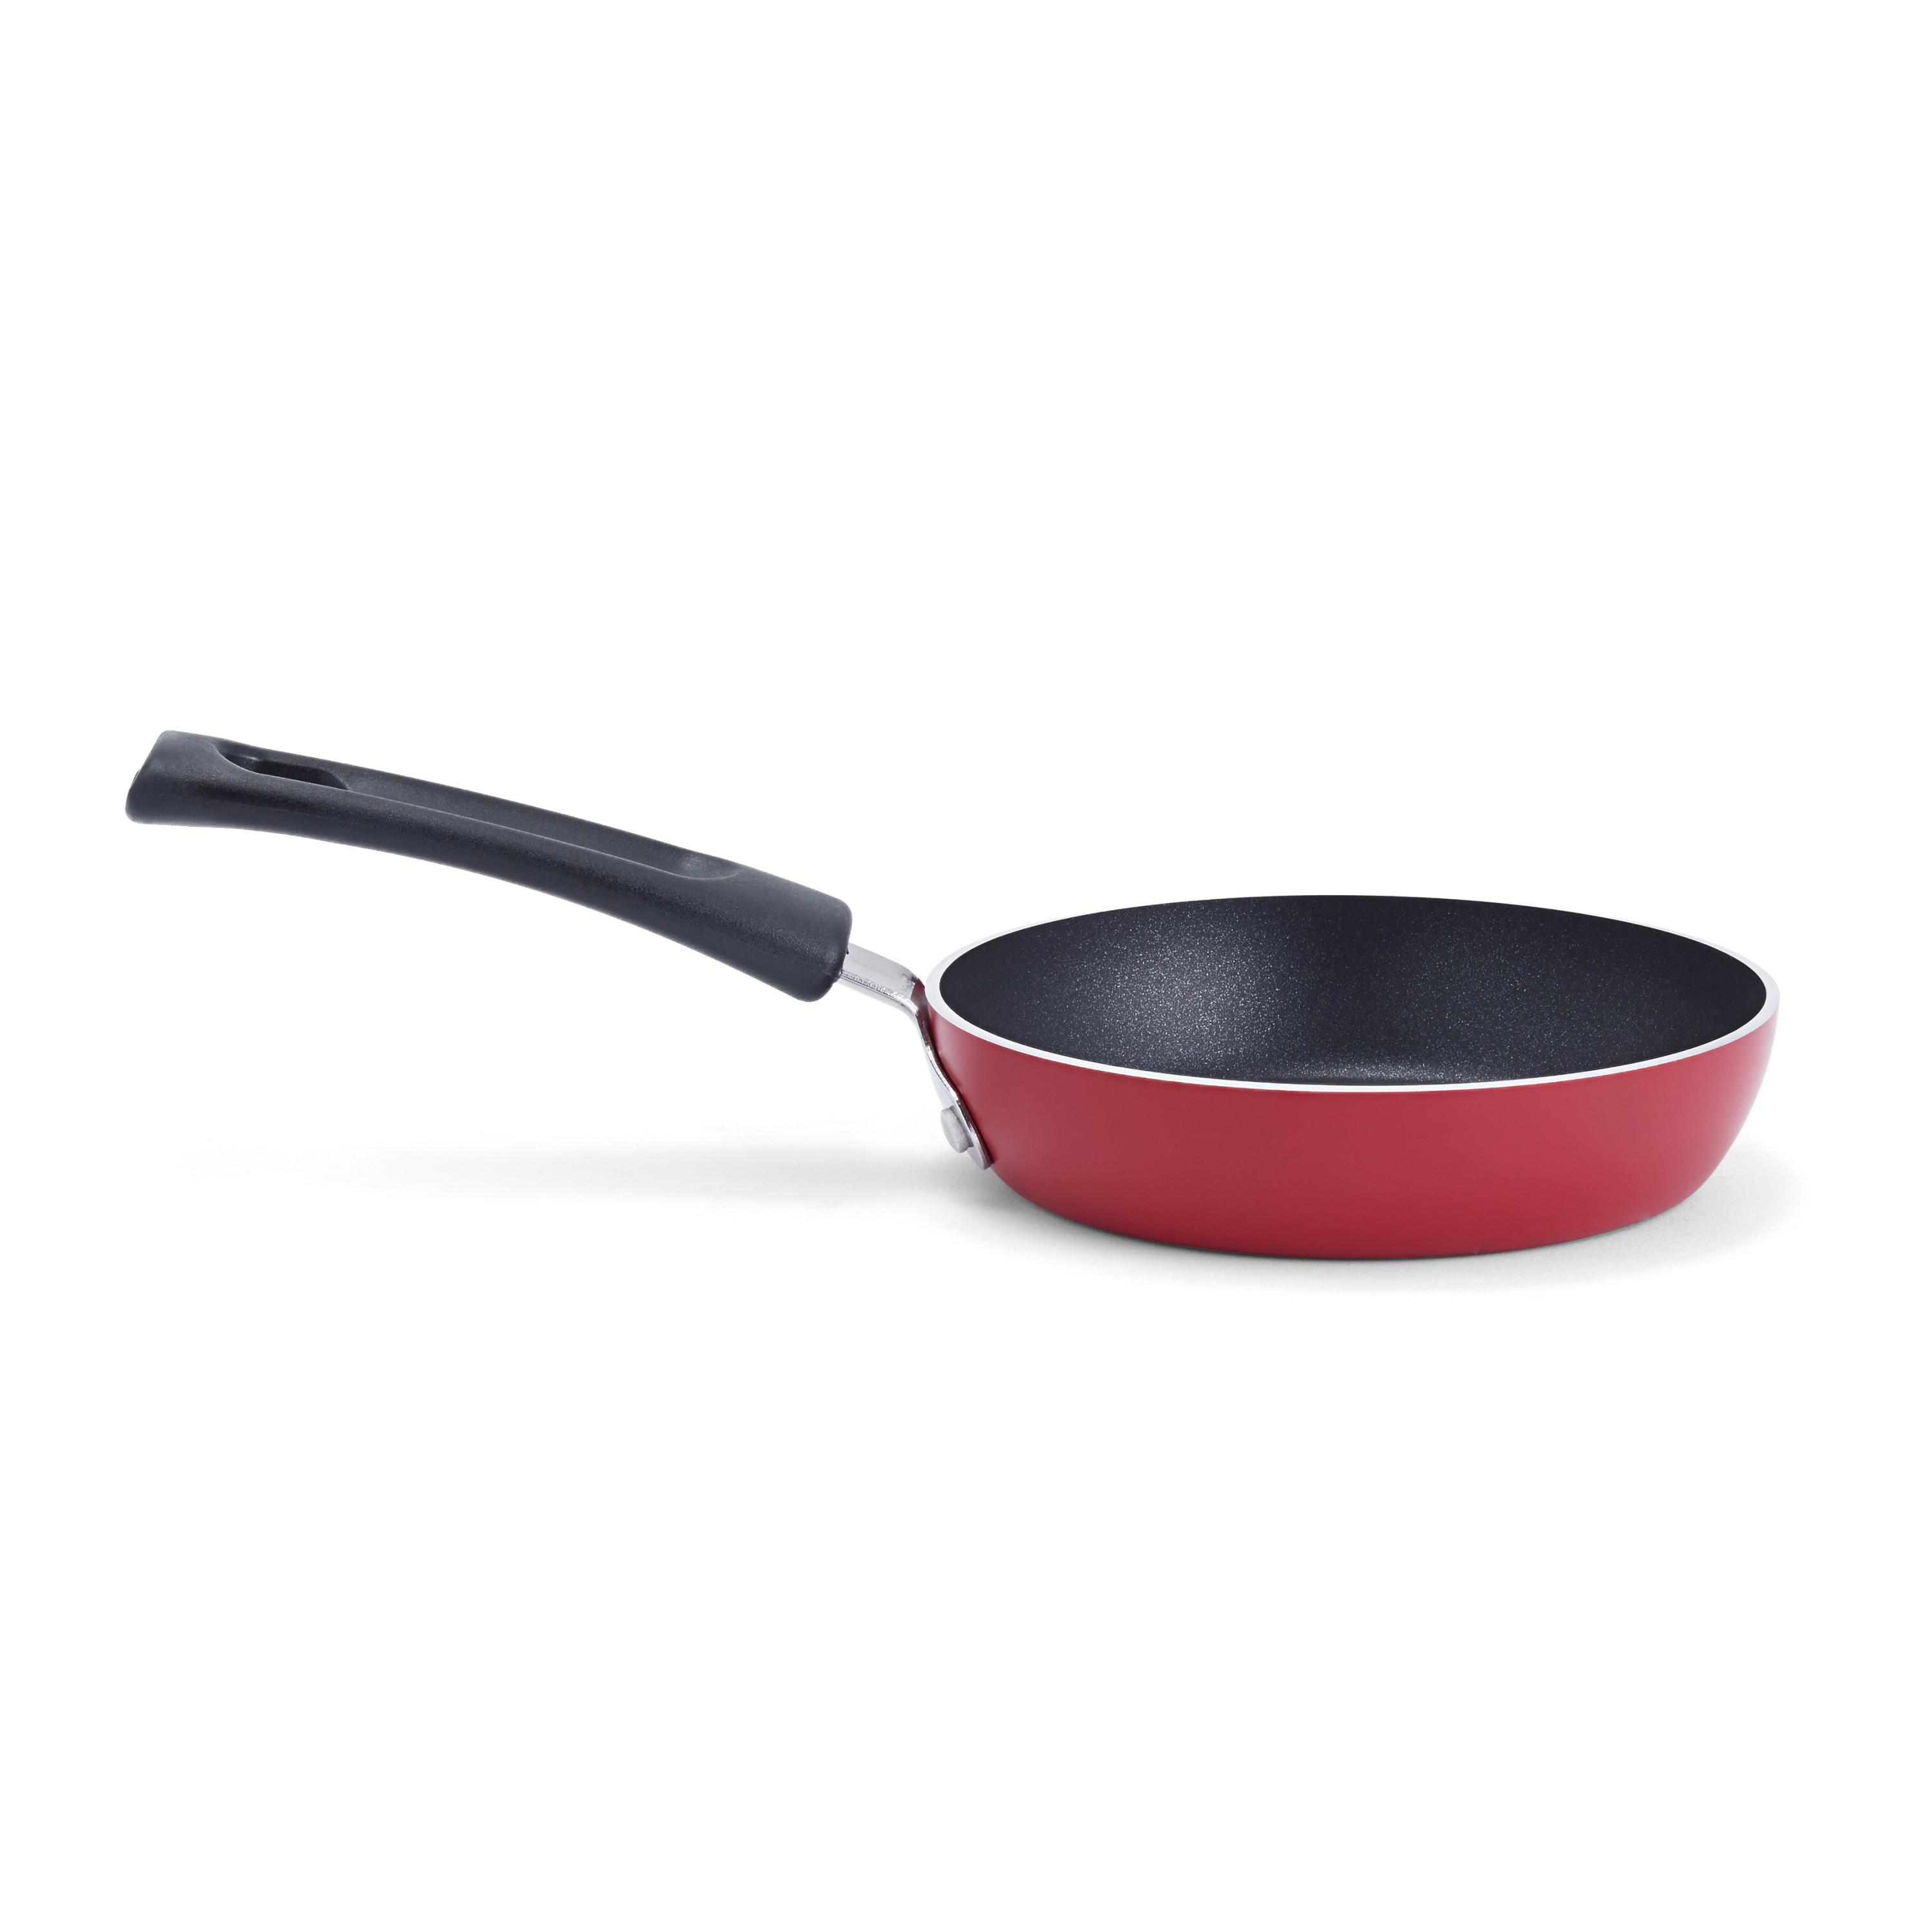 T-fal, Specialty Nonstick, One Egg Wonder 4.5 In. Fry Pan, Red - image 1 of 7